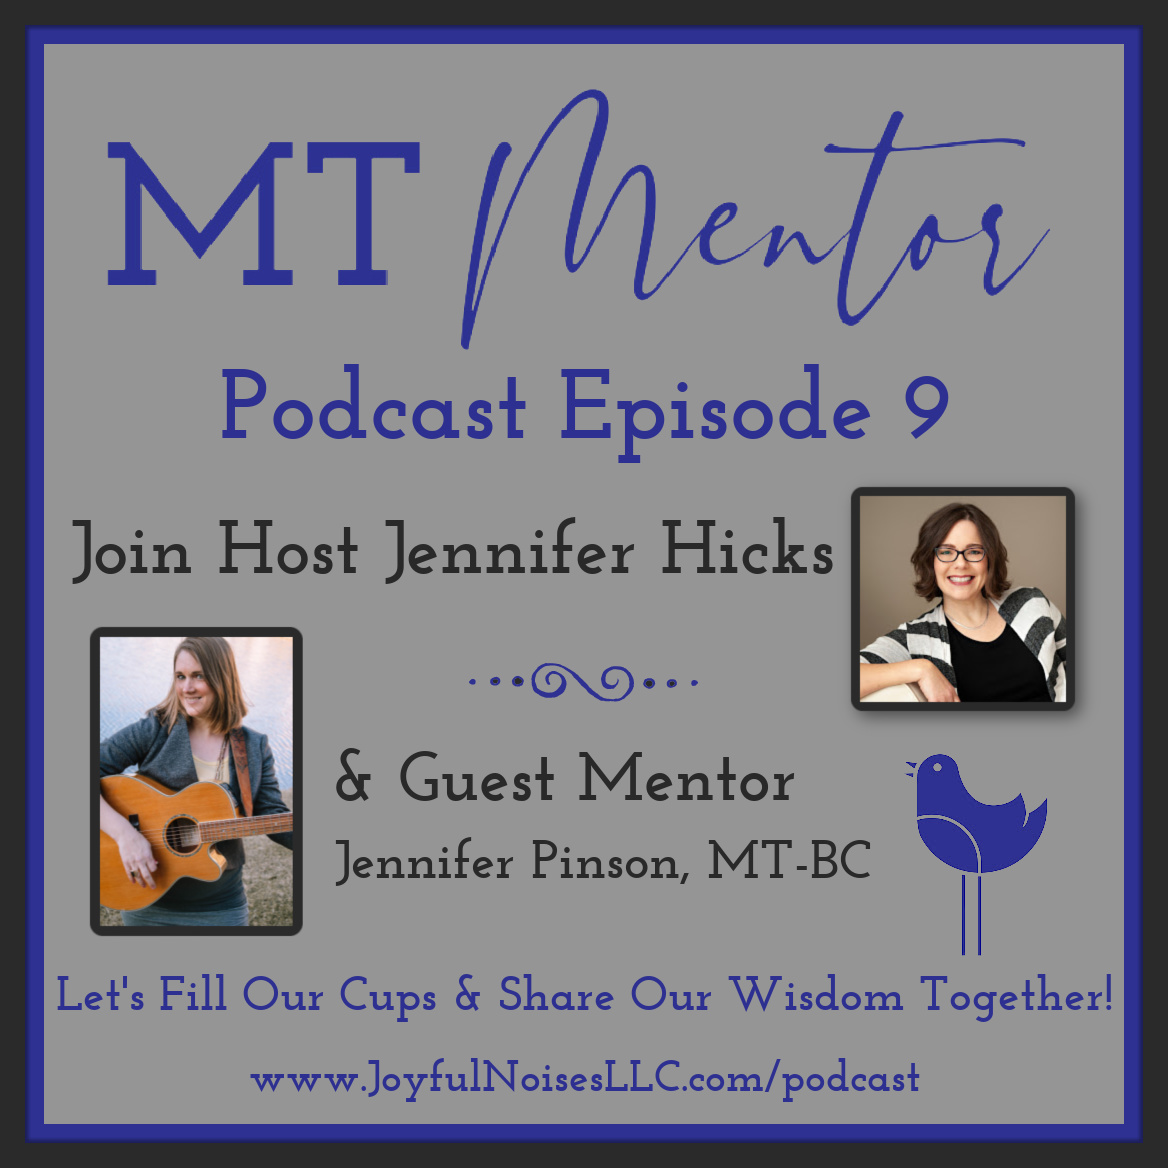 Headshots of Host Jennifer Hicks and Guest Mentor Jennifer Pinson, MT-BC with "MT Mentor Podcast Episode 9" written in blue on a gray background